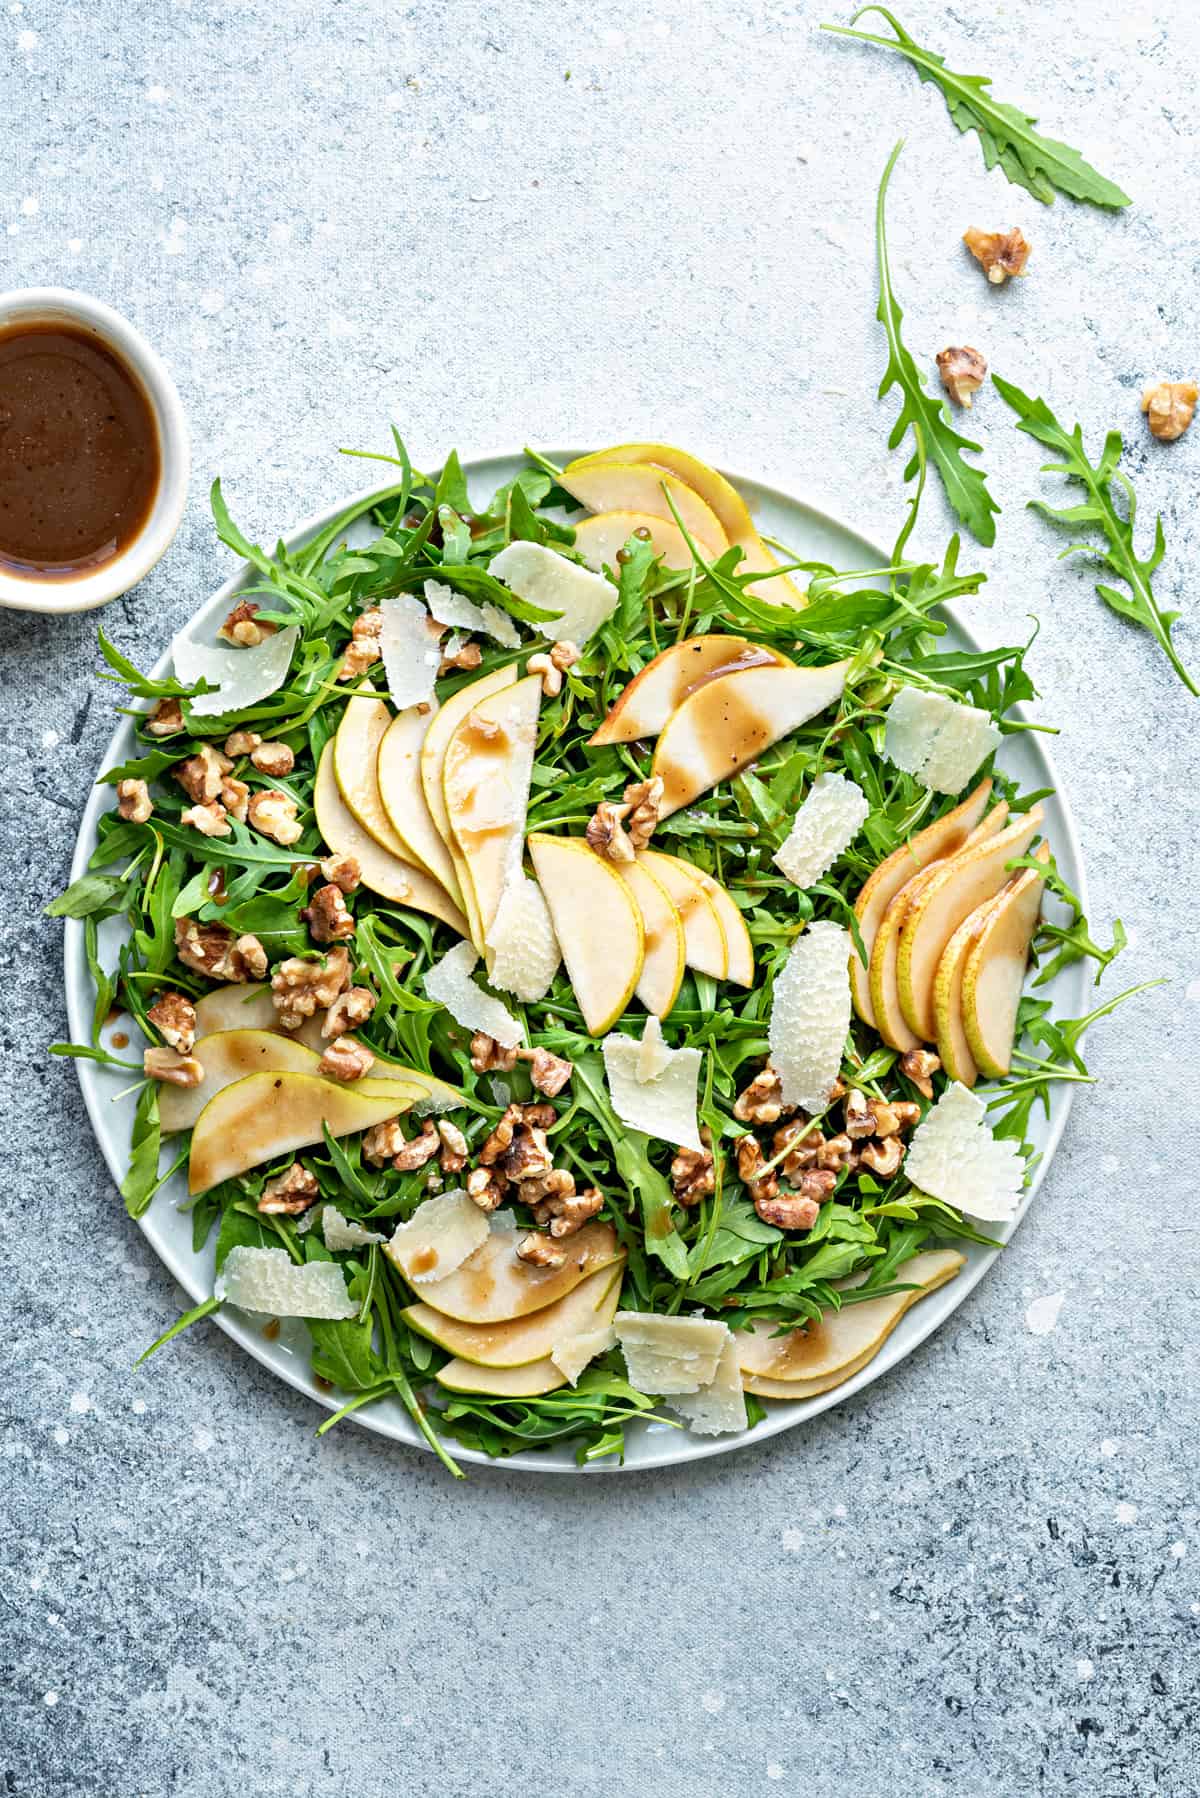 Top down large plate of pear and rocket salad with balsamic vinaigrette in bowl on side.